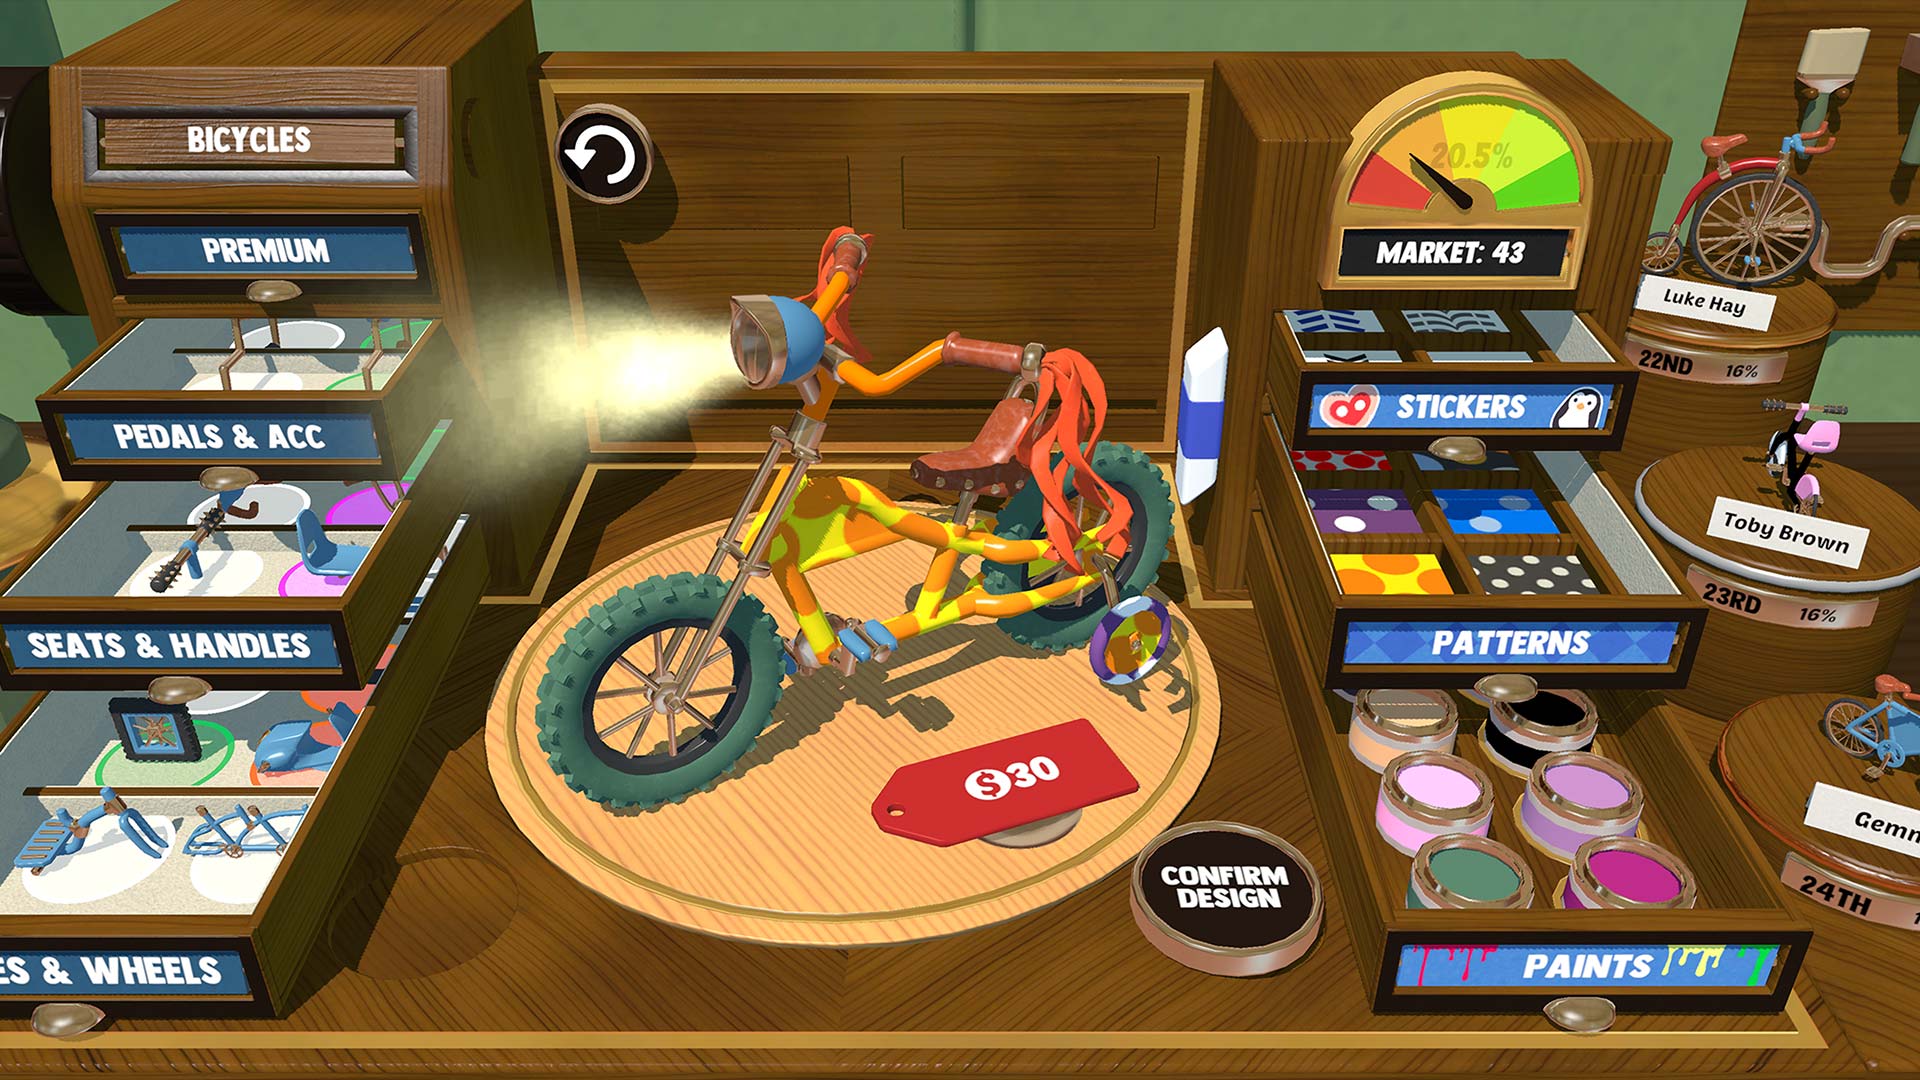 Decorating a children's bicycle in a Legacy screenshot.